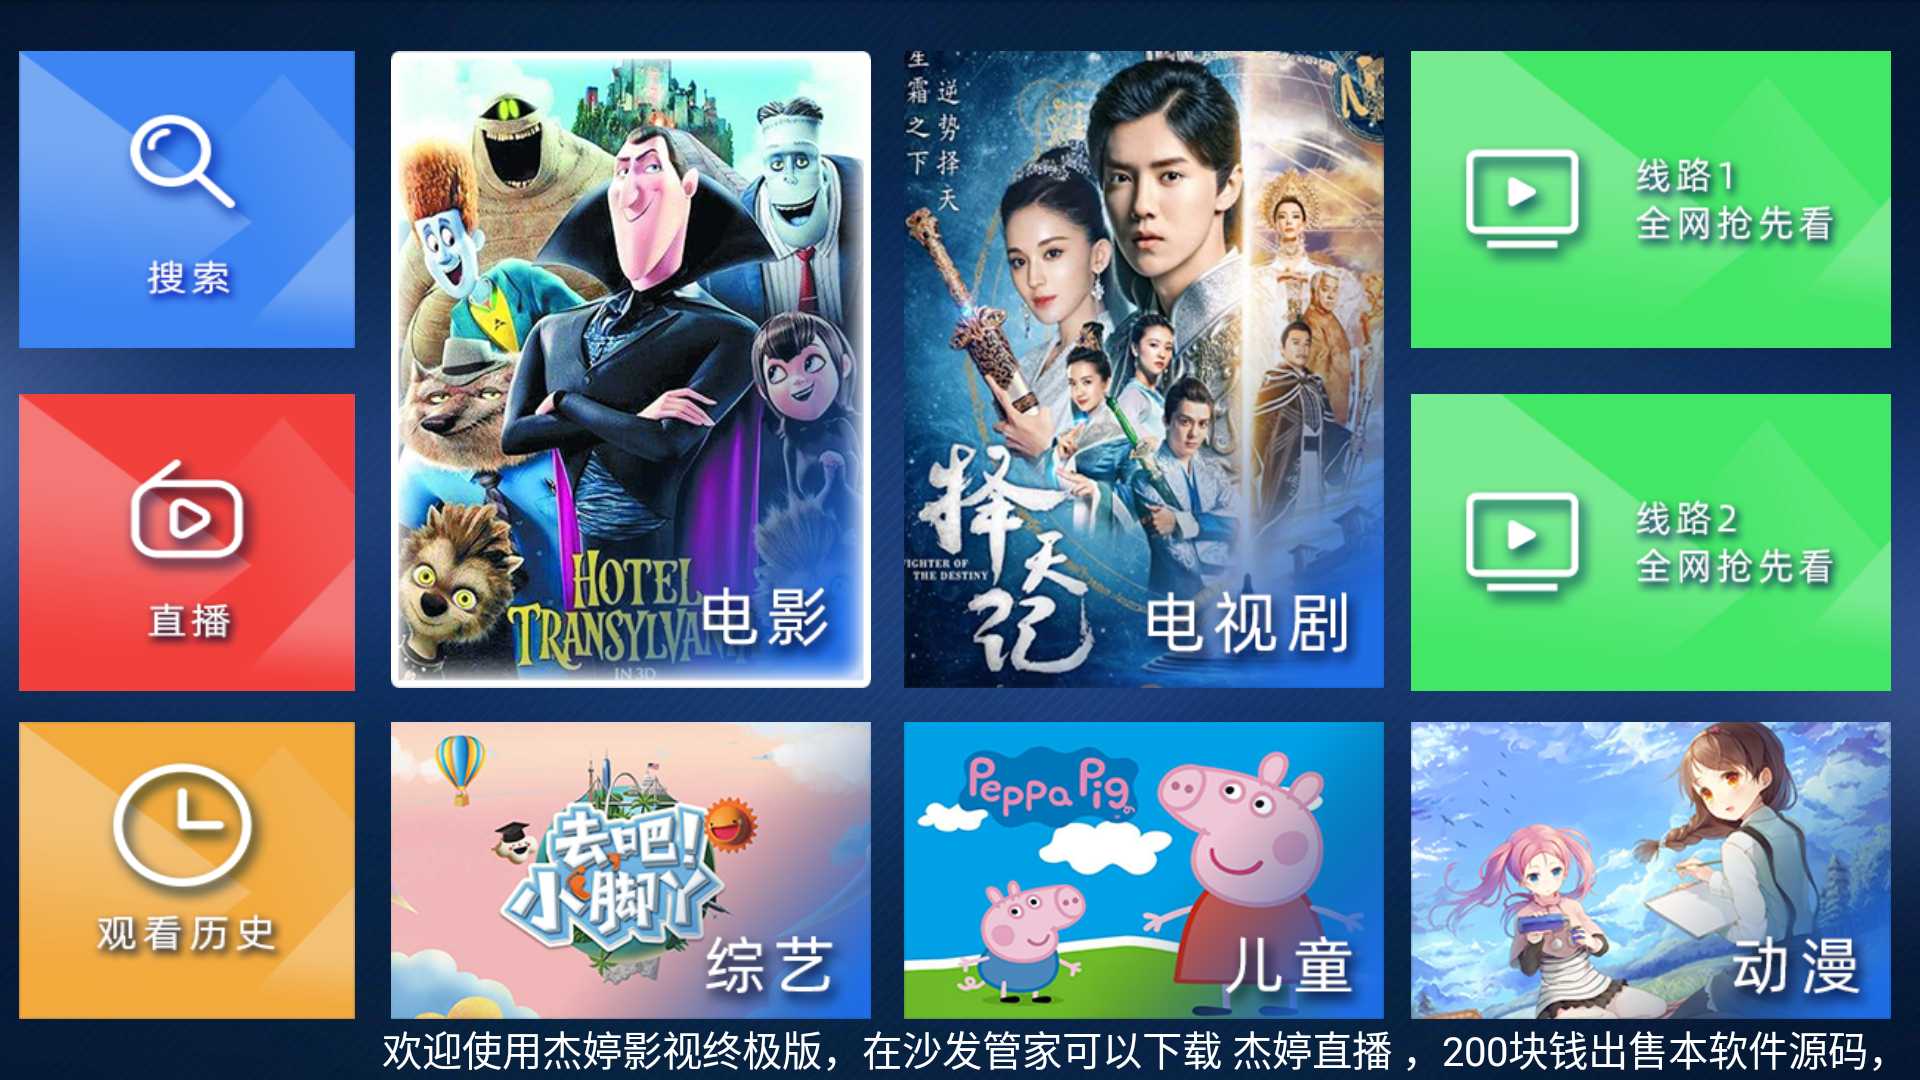 Jieting Film and Television